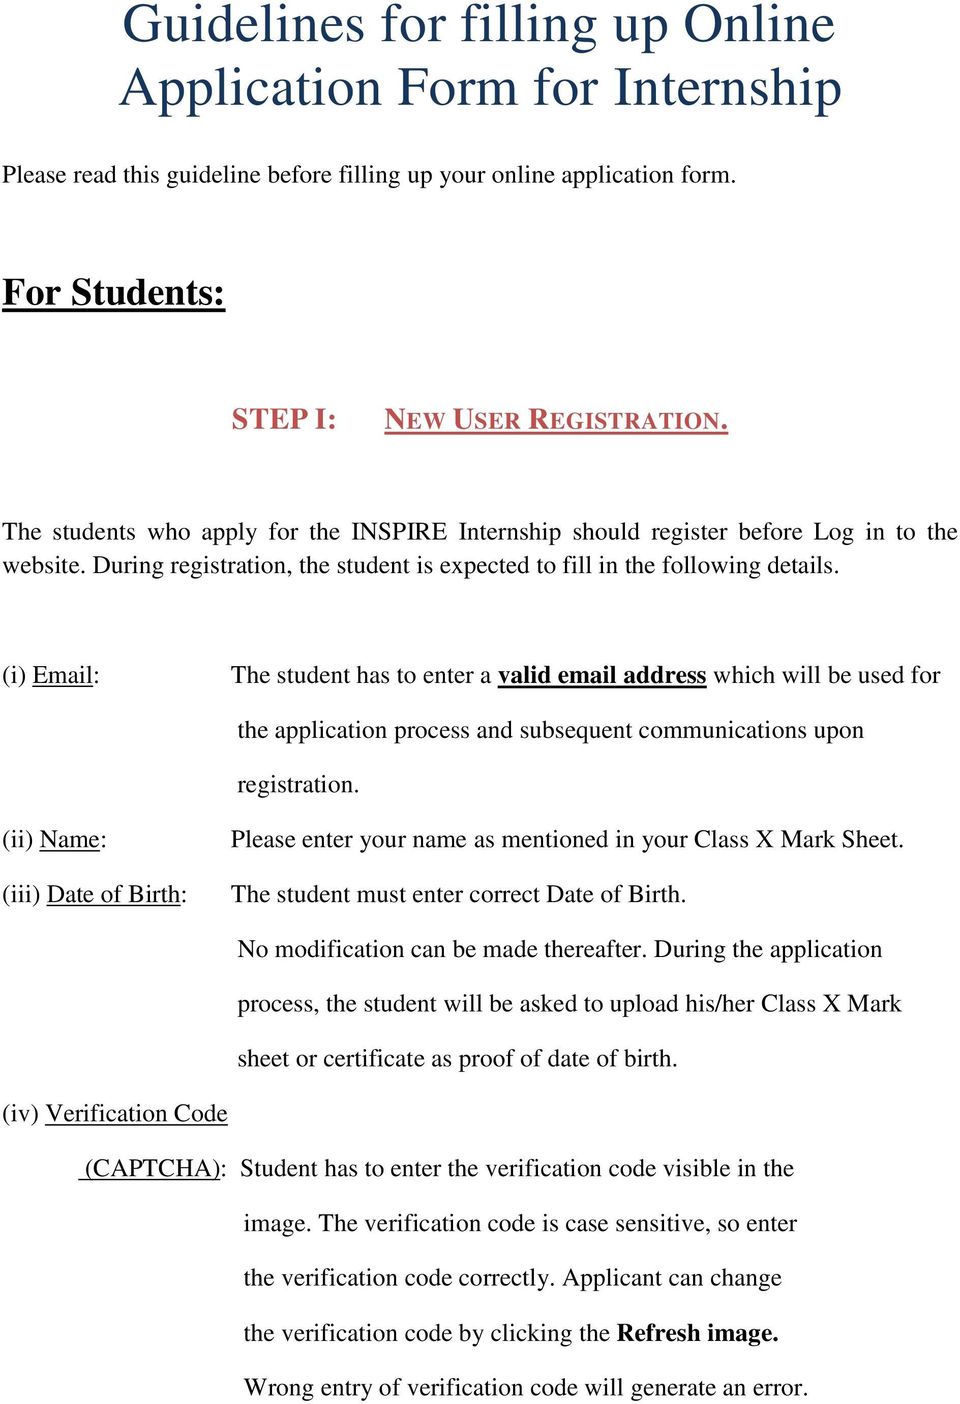 (i) Email: The student has to enter a valid email address which will be used for the application process and subsequent communications upon registration.